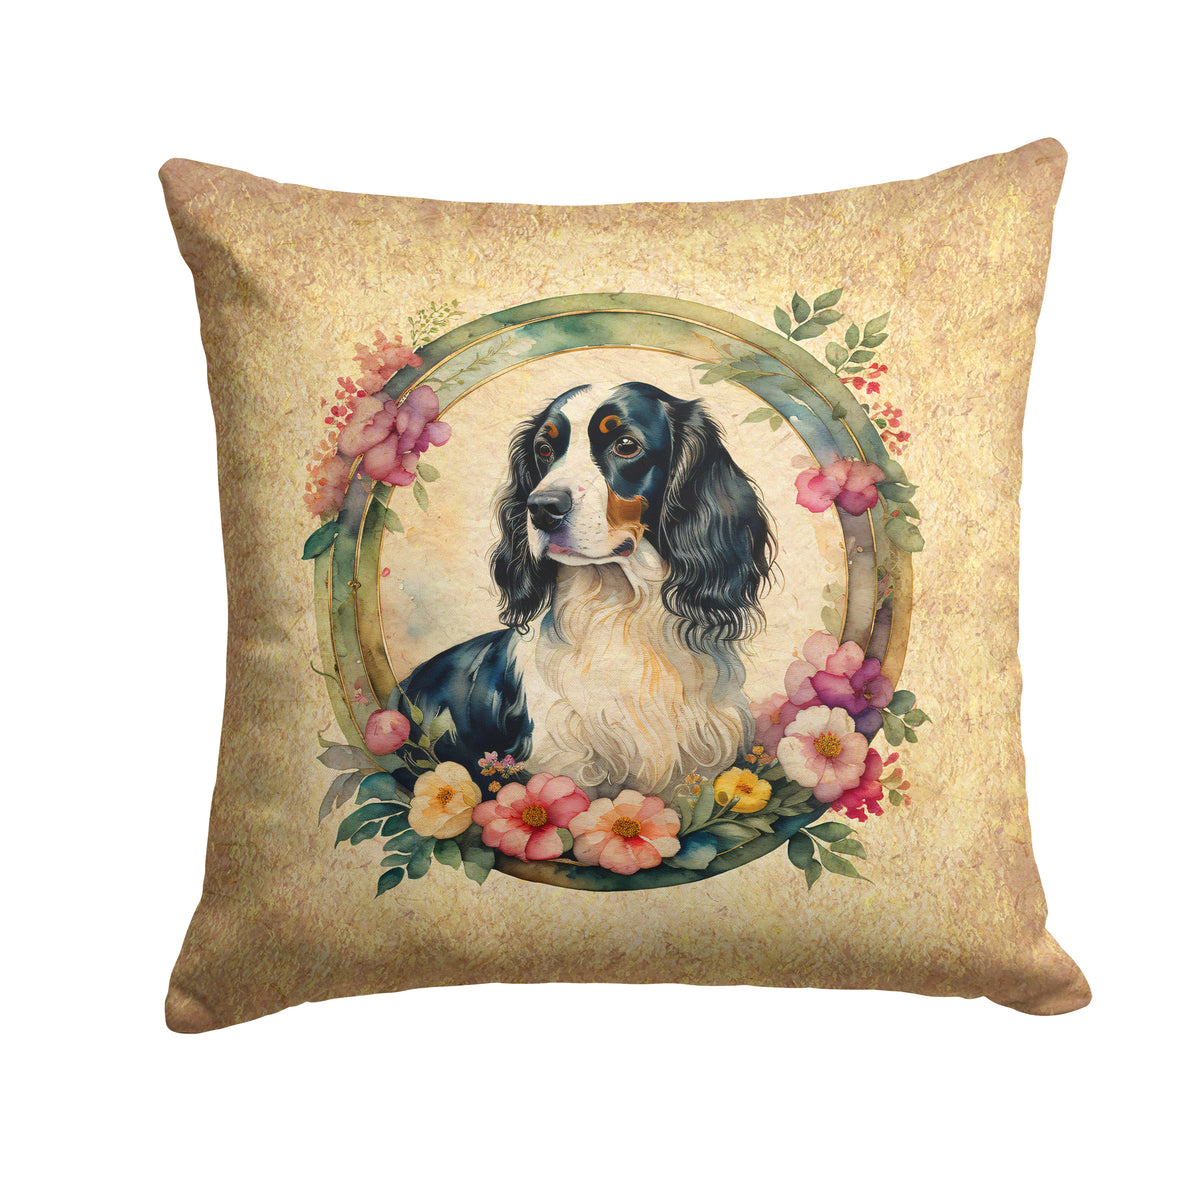 Buy this English Springer Spaniel and Flowers Fabric Decorative Pillow